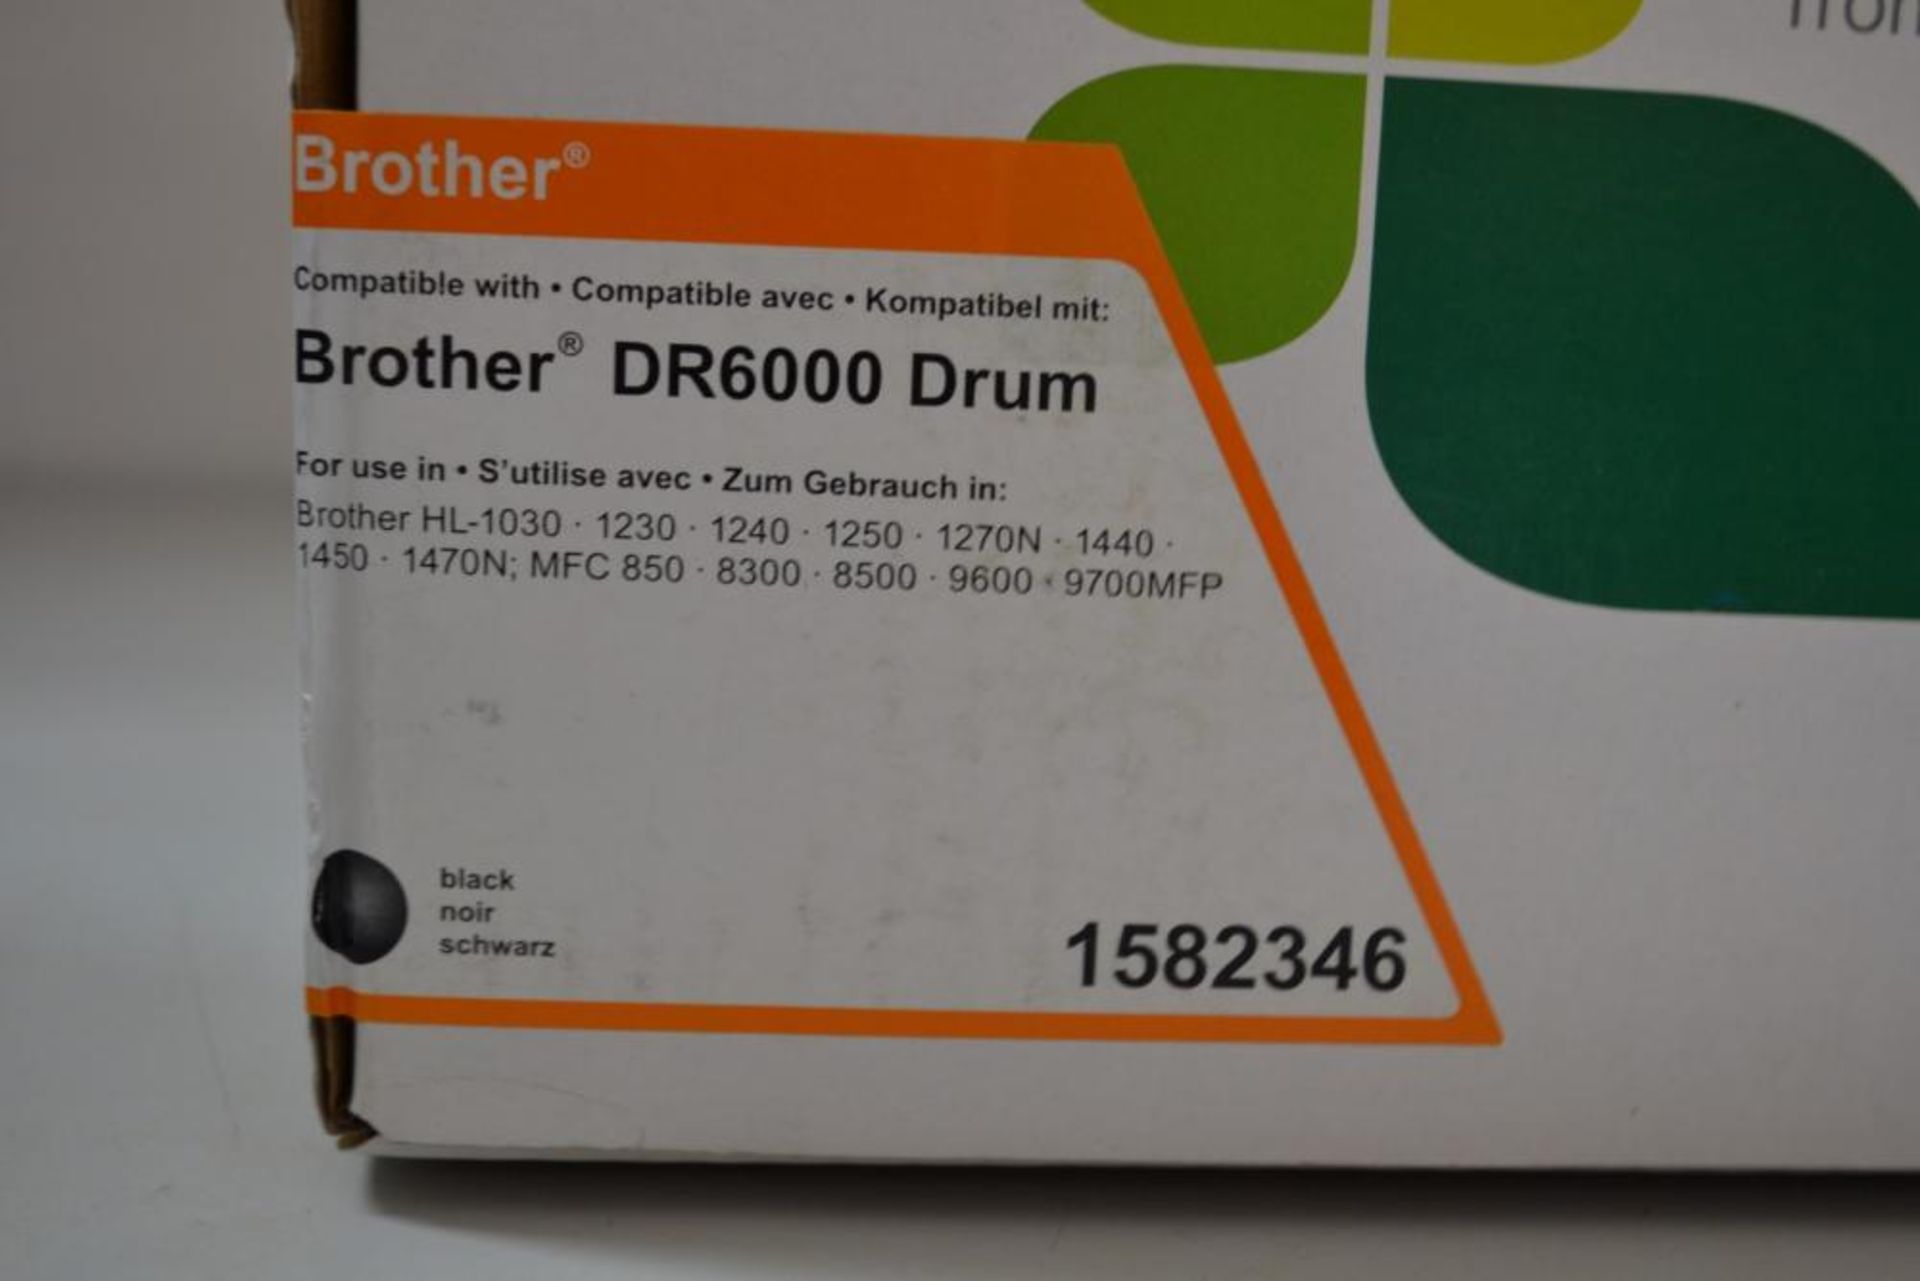 1 x Office Depot Compatible Brother DR-6000 Drum Black New In Box - Ref HK210 - CL394 - Location: Al - Image 2 of 2